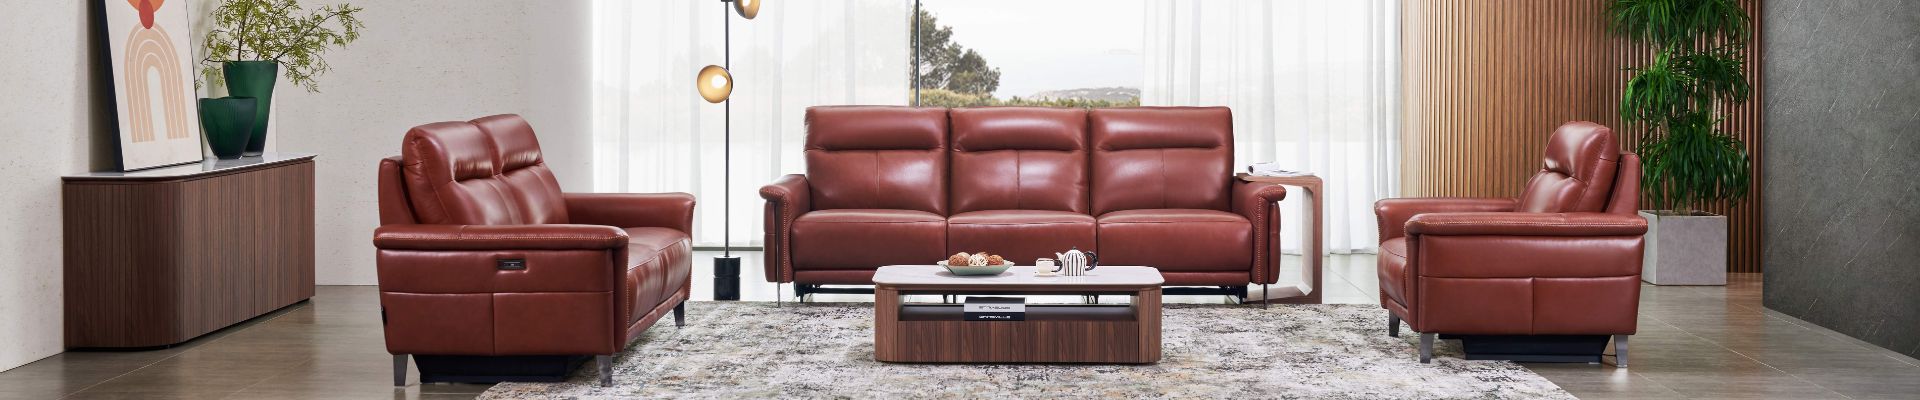 Horizon Electric Recliner Sofa Collection - Gainsville